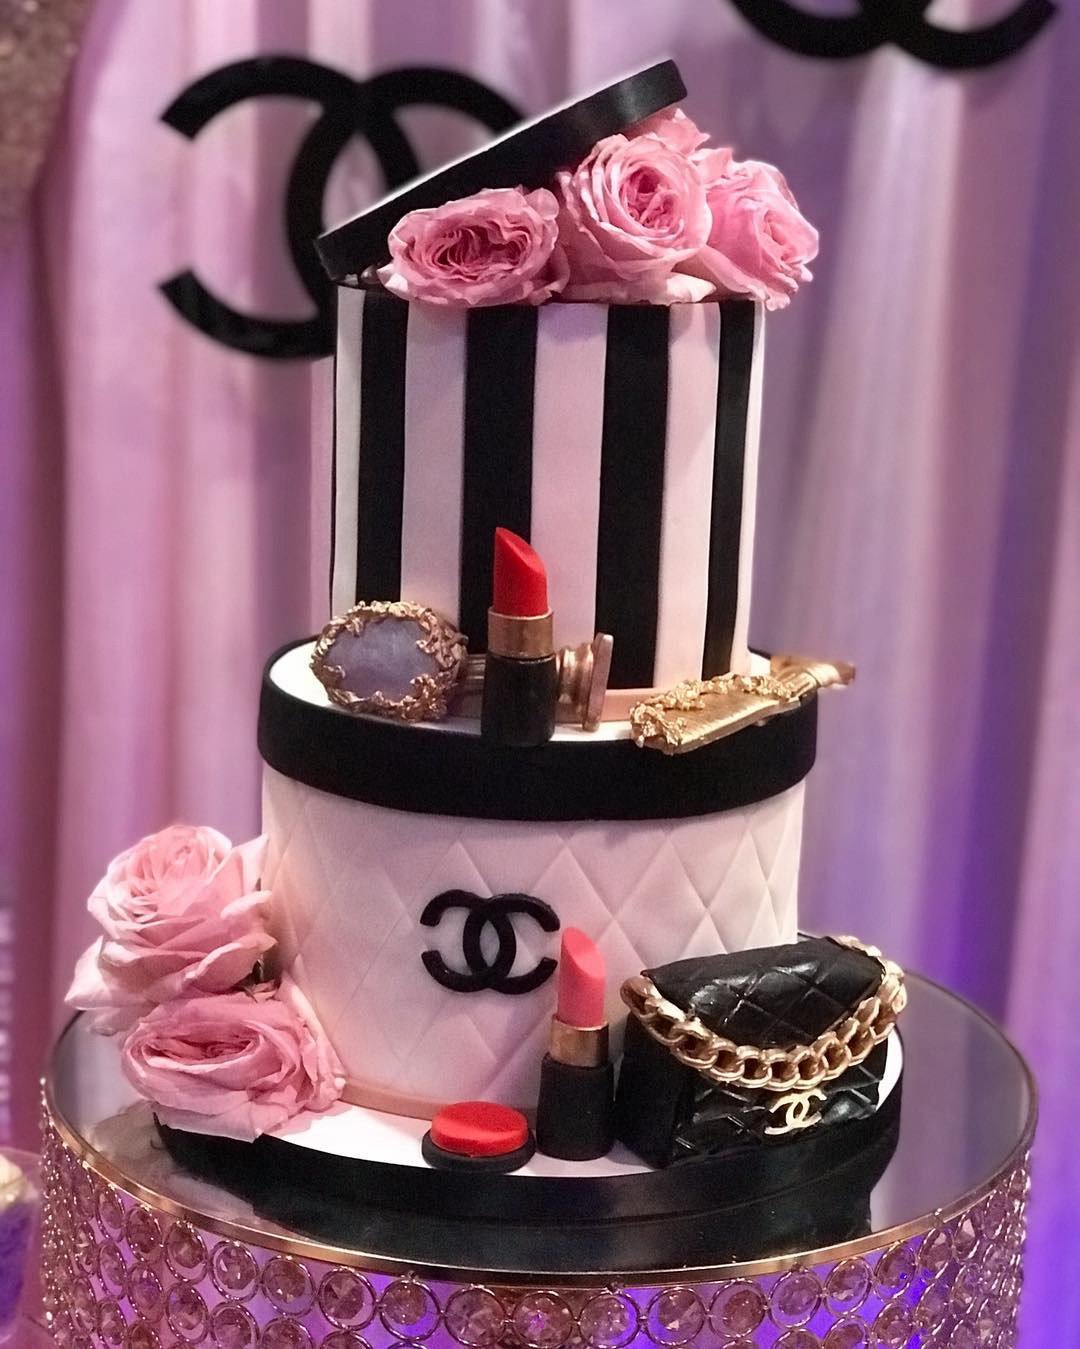 Chanel Cakes Pictures (97 Available)